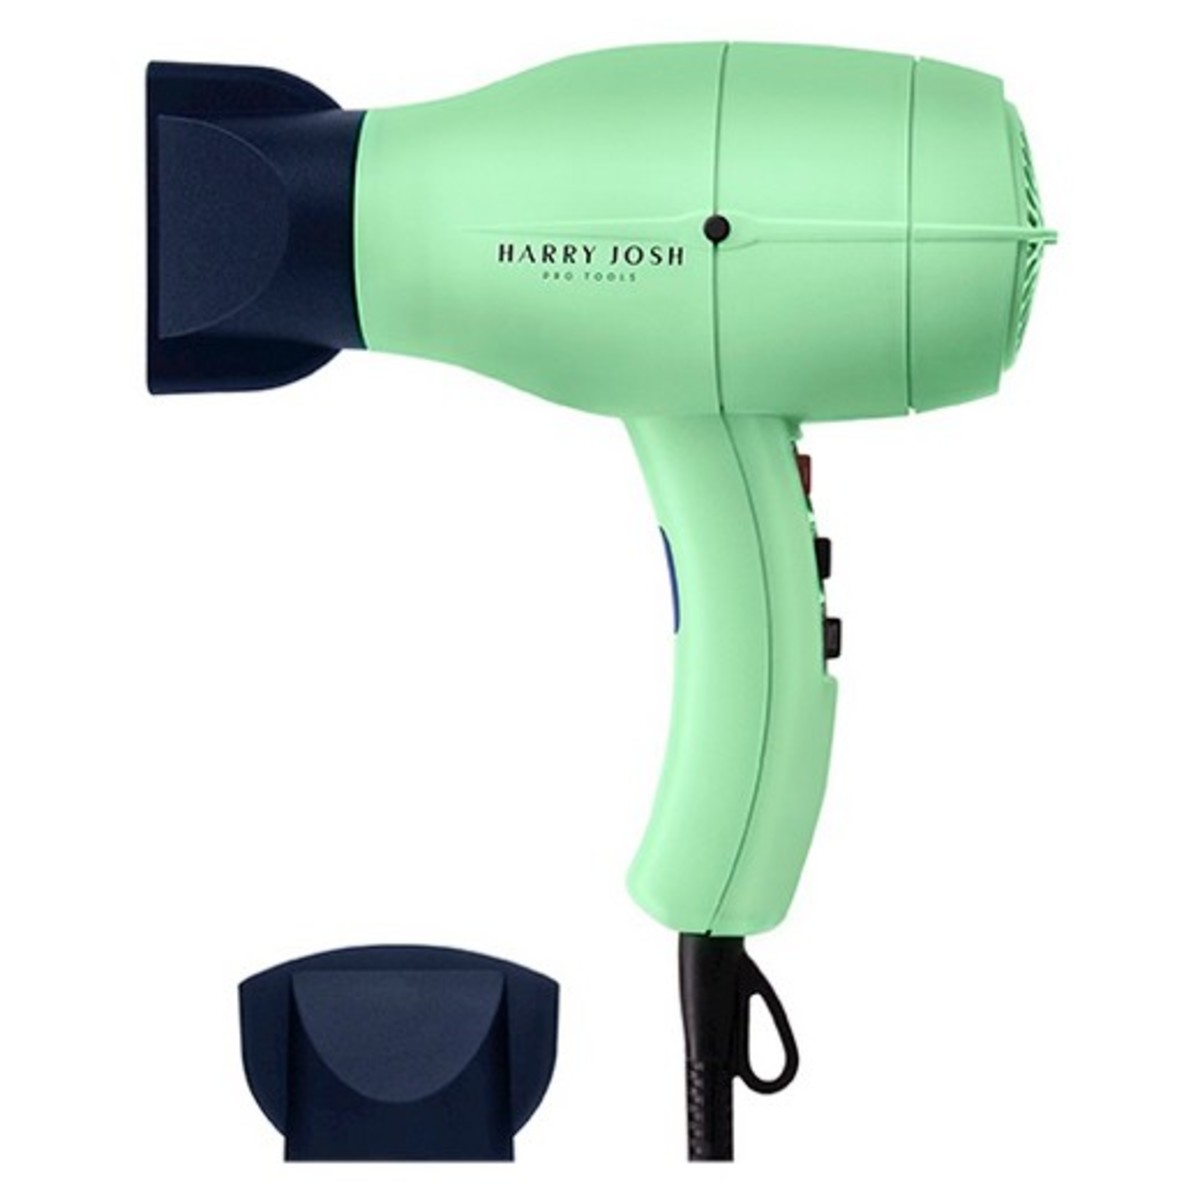 Harry Josh Pro Hair Dryer 2000, $249.99, available here. 